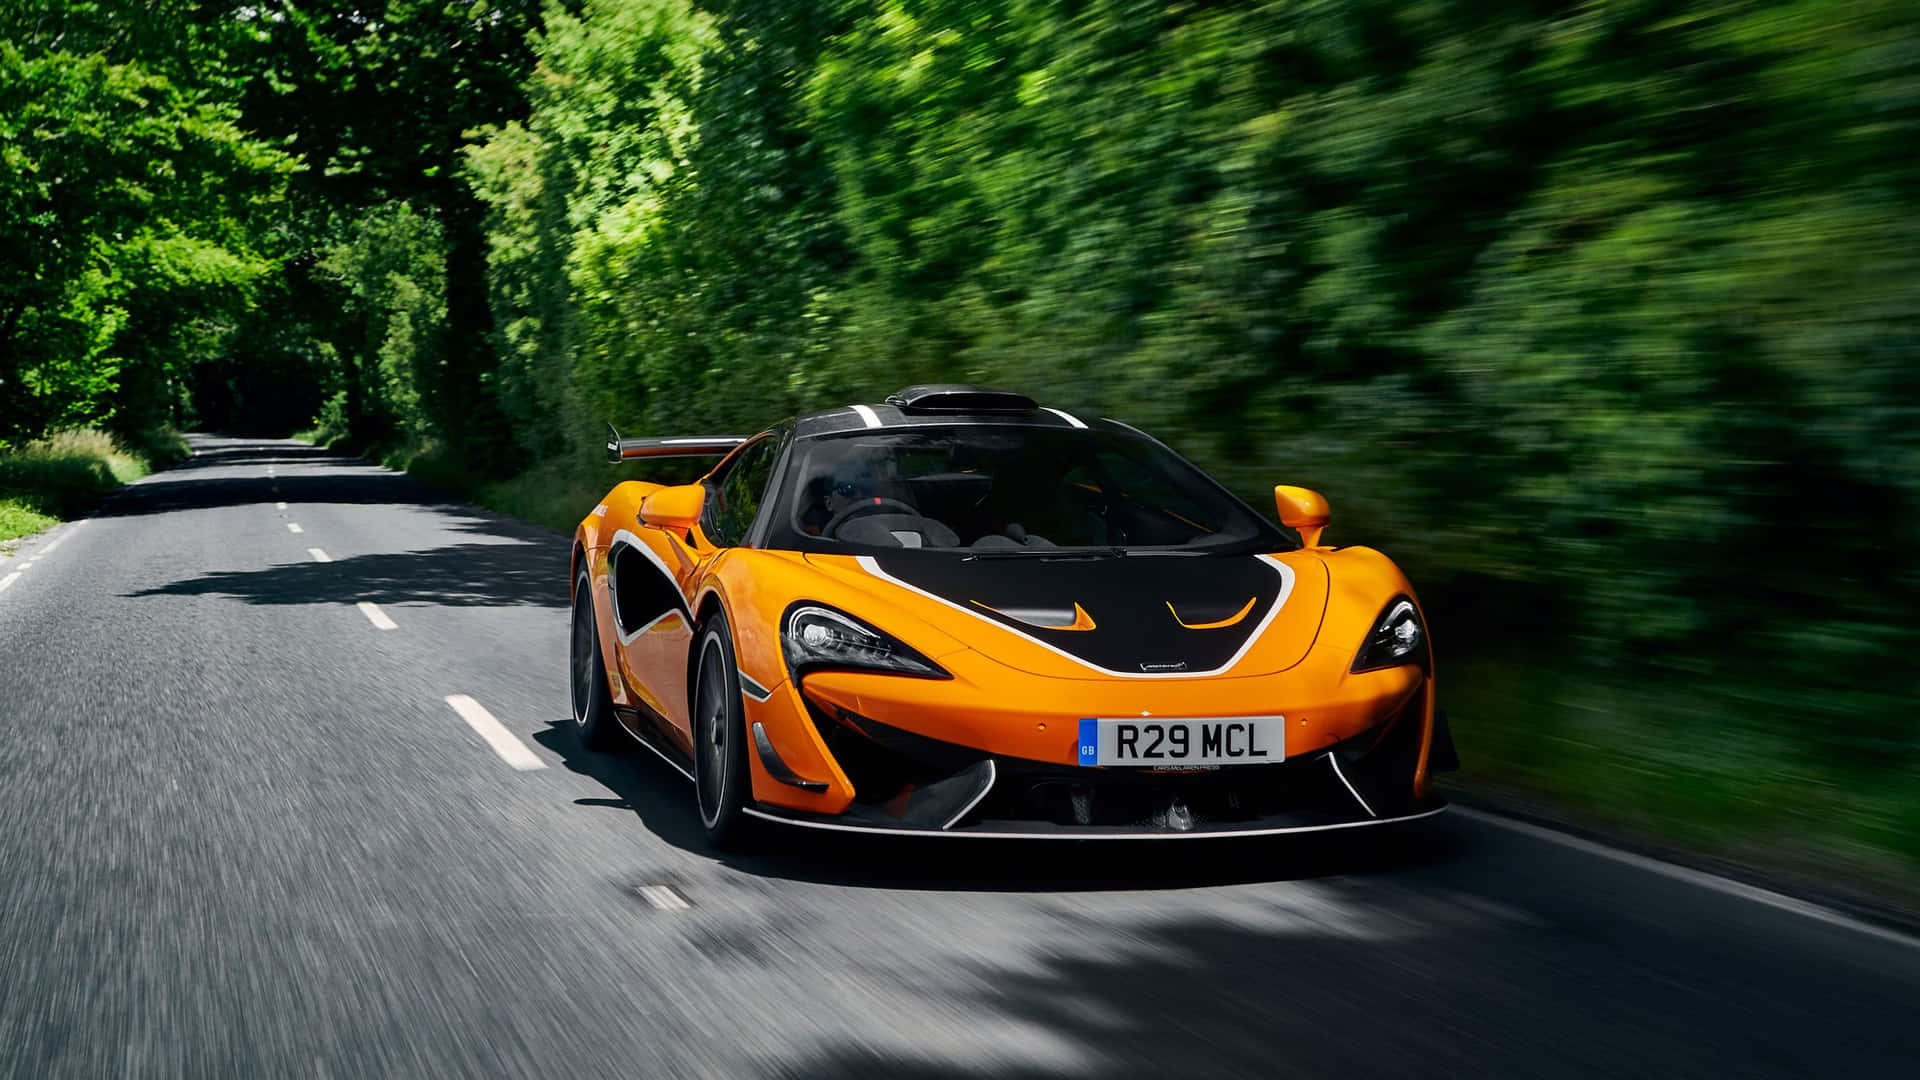 A stunning McLaren 620R showcasing its sleek design and impeccable performance Wallpaper